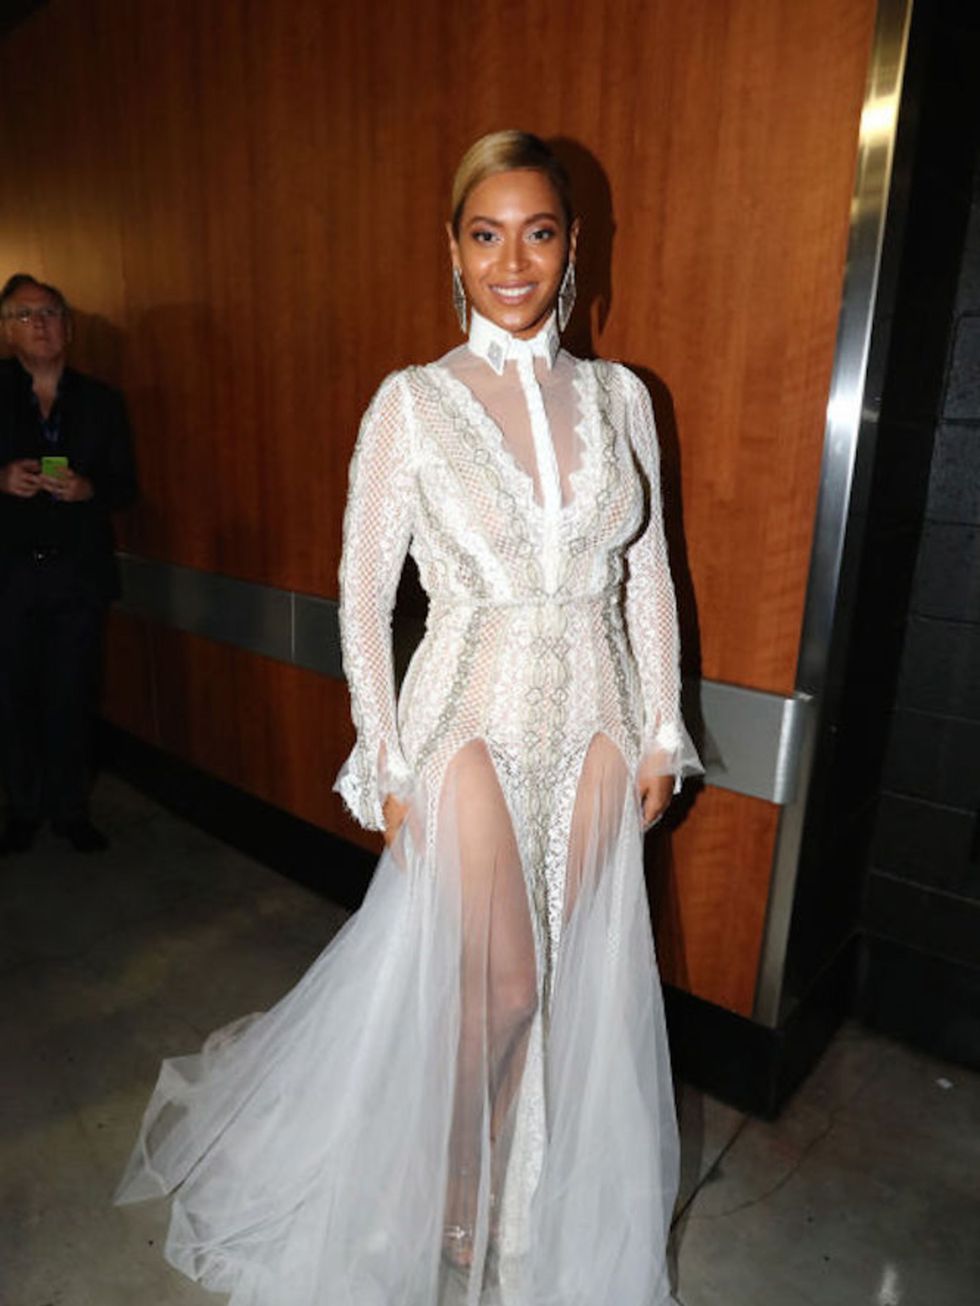 Beyoncé wore a dress from bridal designer Inbal Dror's fall 2016 collection to the Grammy's.